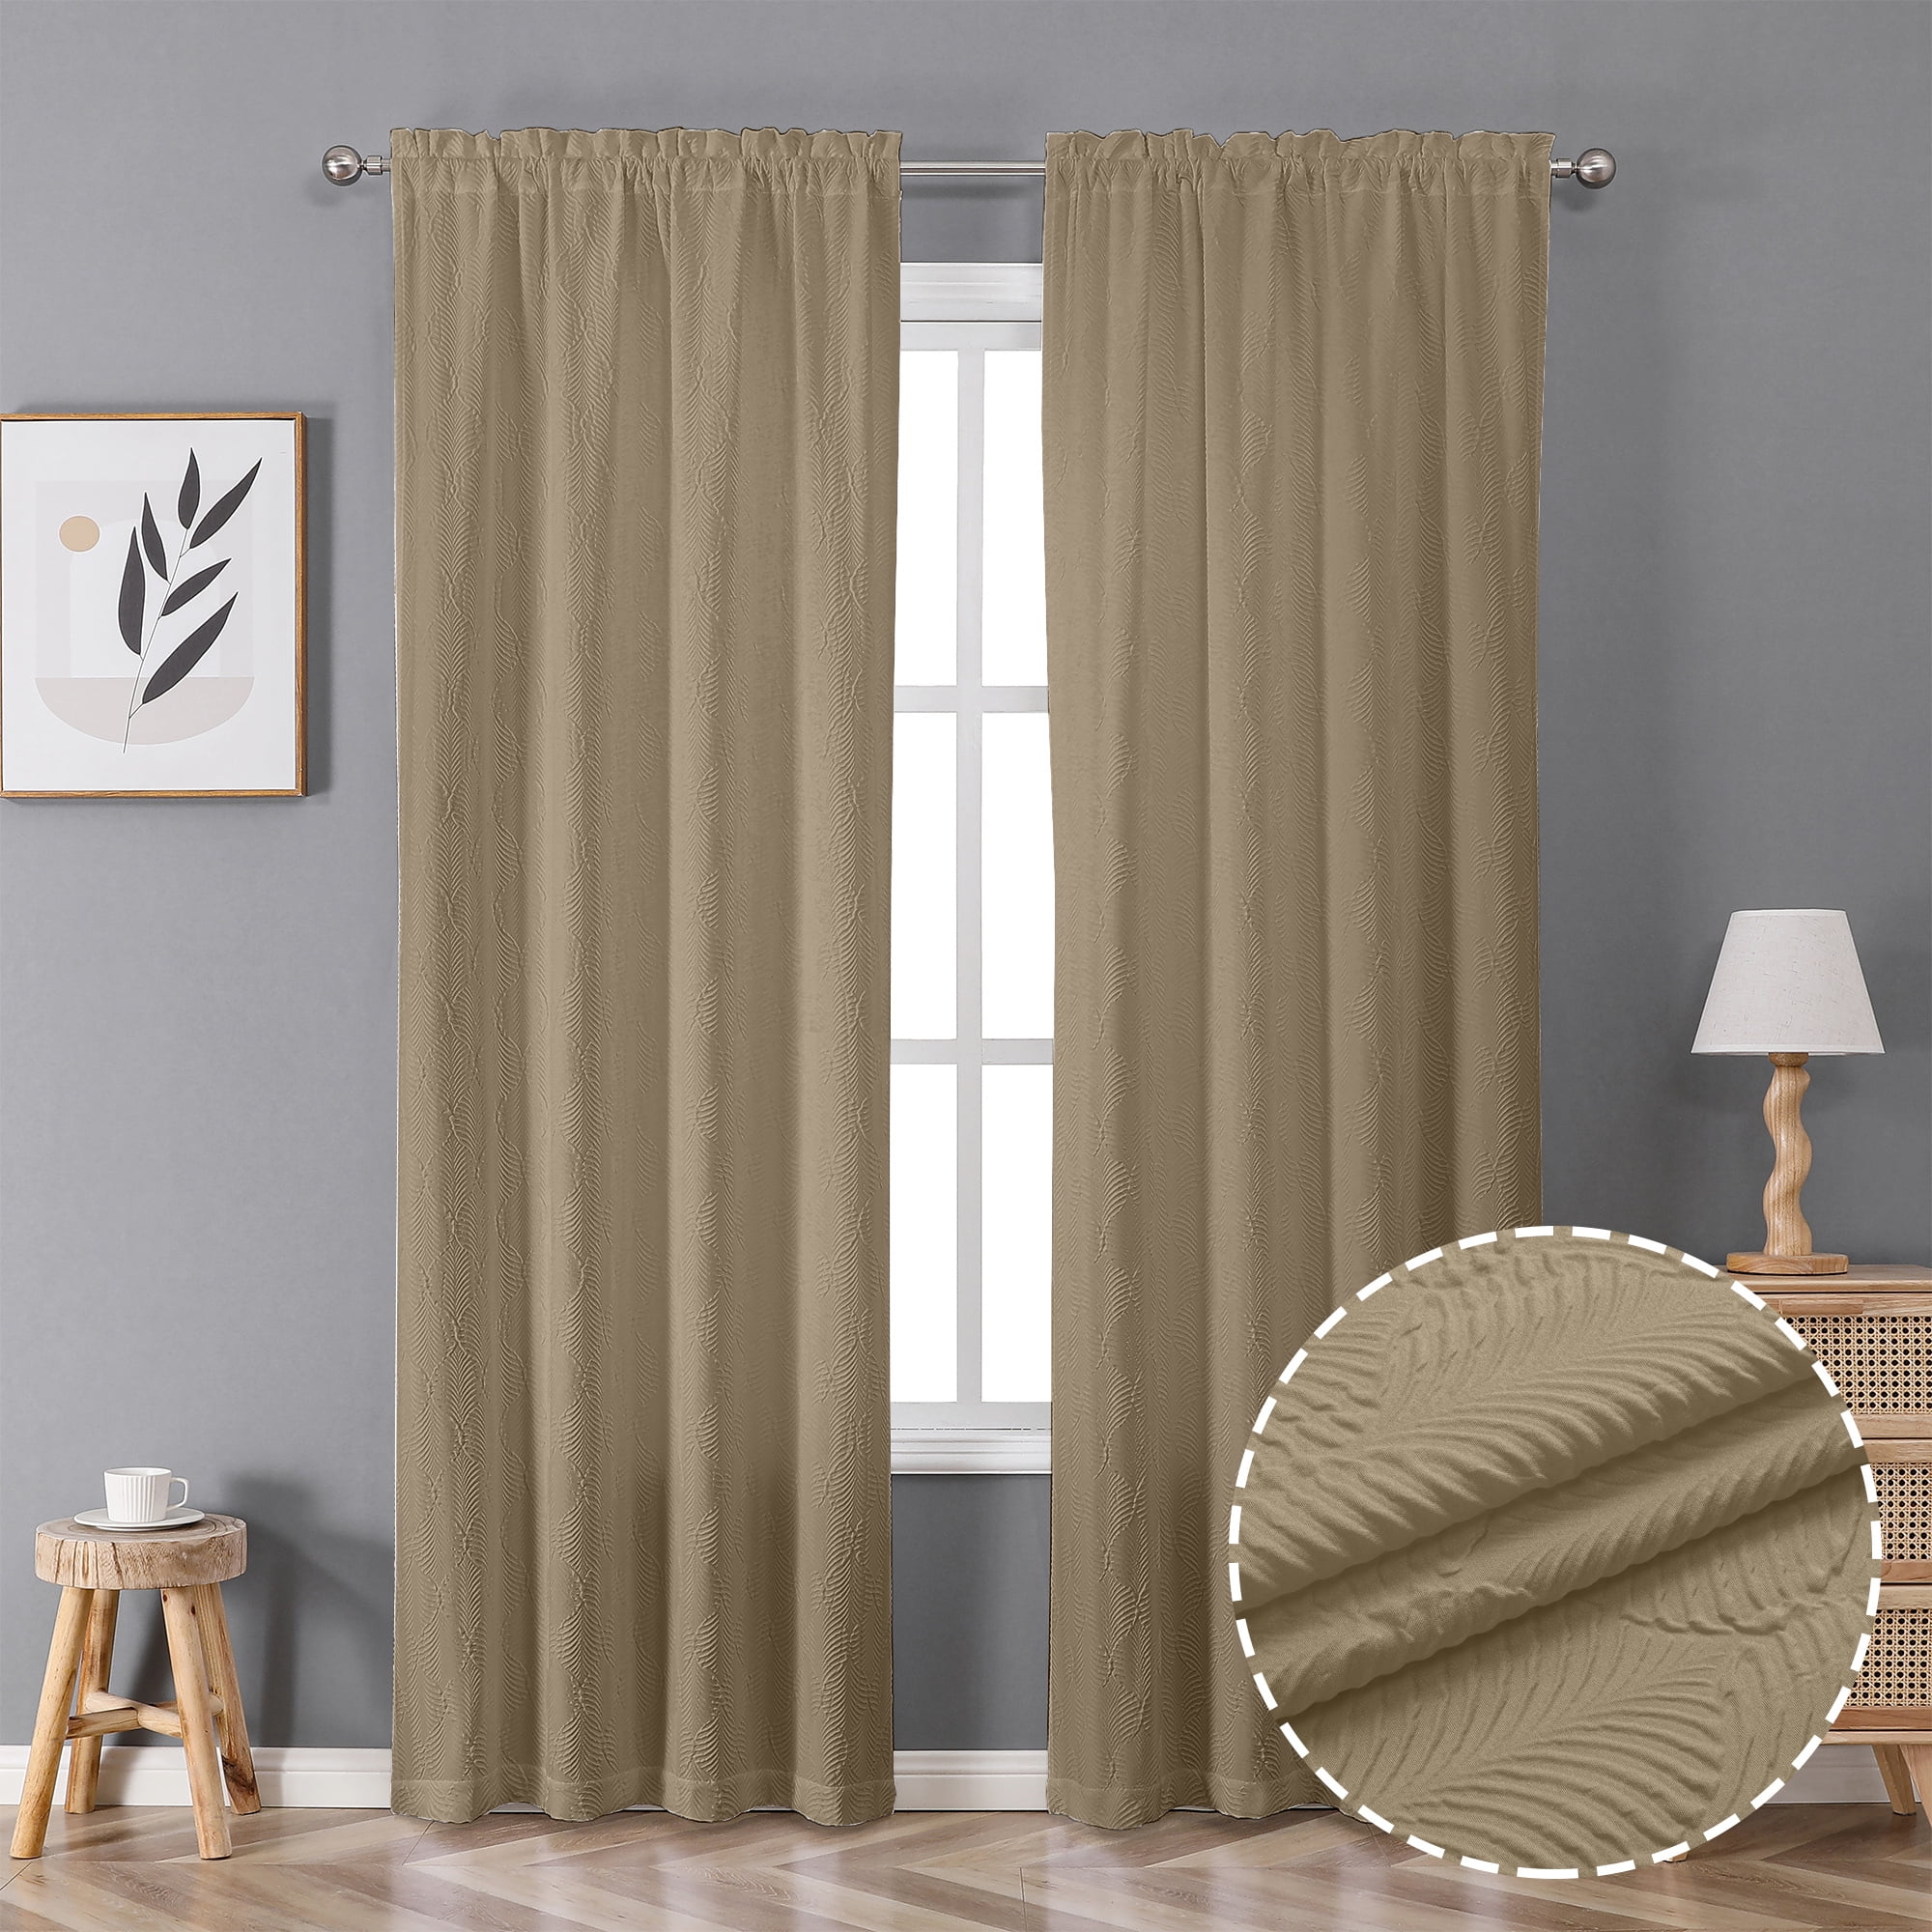 Piece Homes & Better Taupe Taupe, 74x63 & Open & Sheer 4 Set, Gardens Stitch Panel Curtain Solid